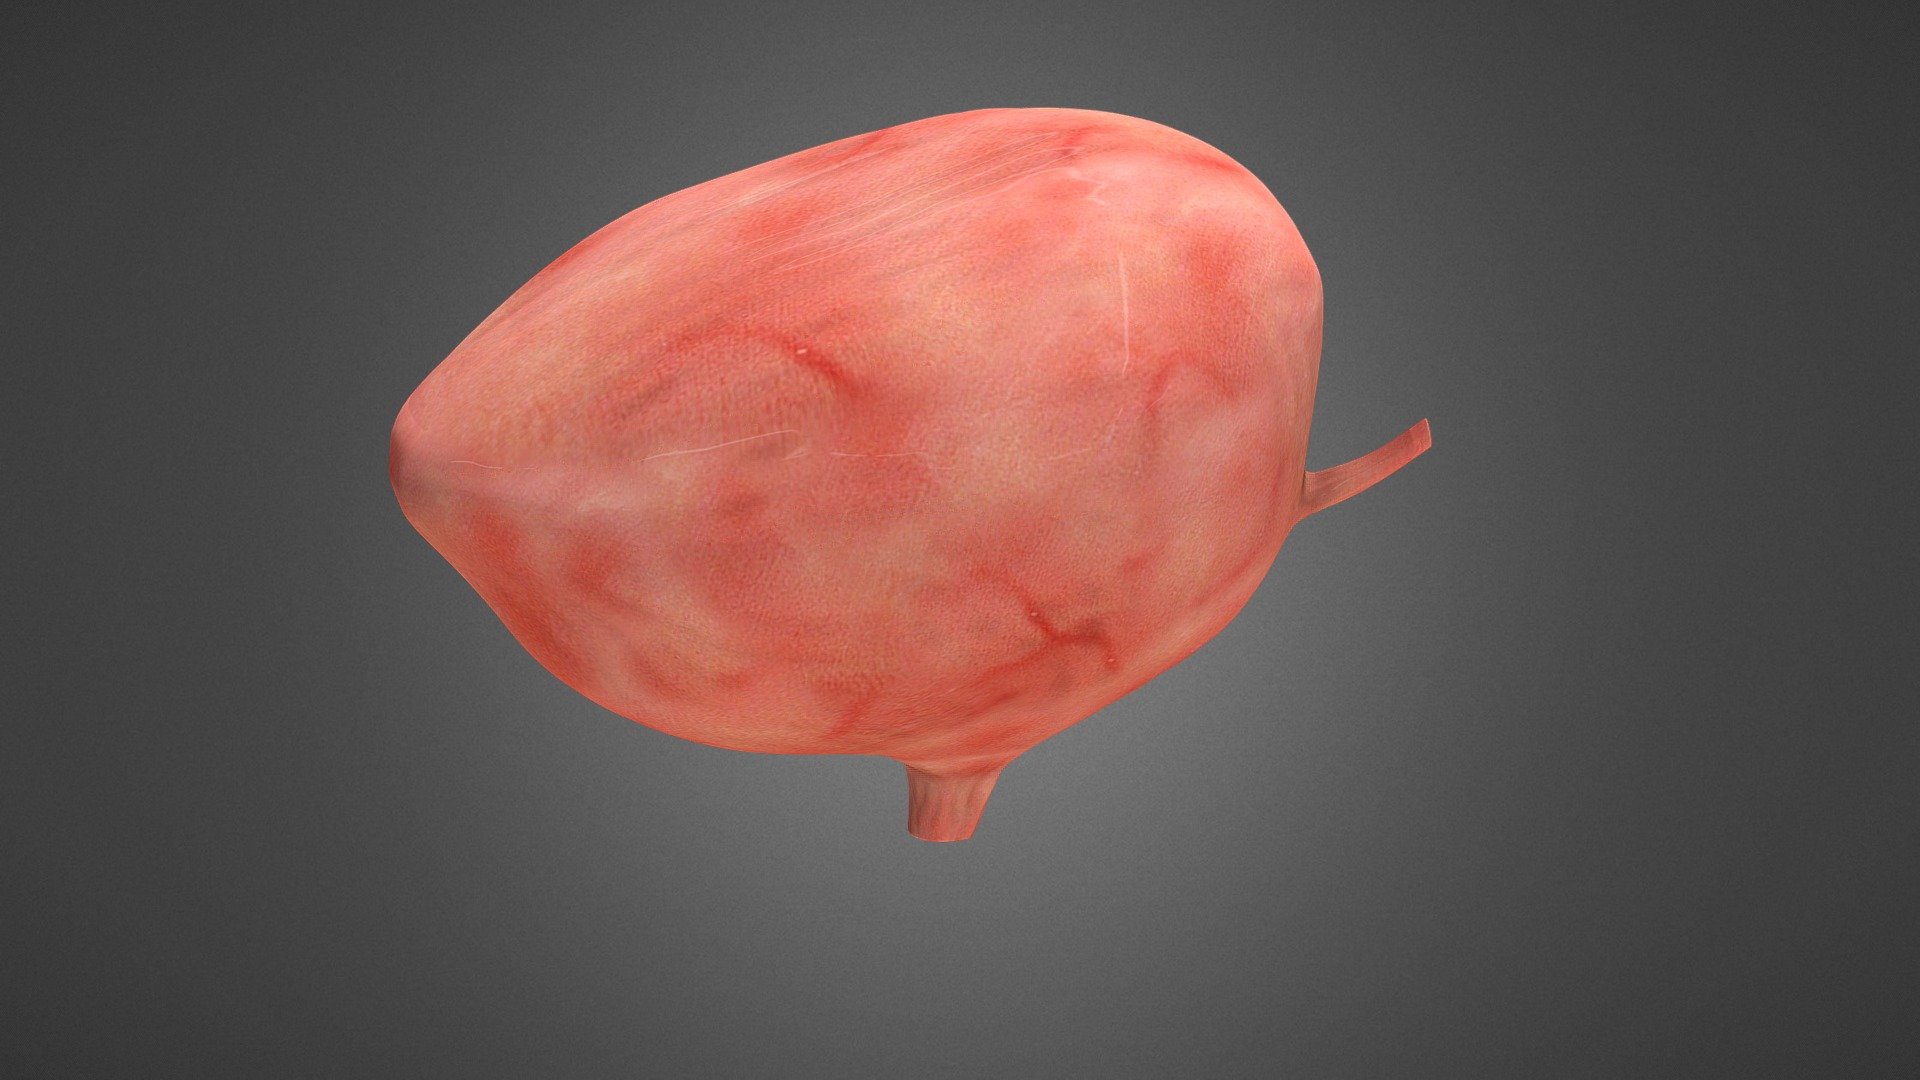 The human hurinary bladder. A hollow muscular organ that stores the urin in the body. Can hold 350 ml urin for hours without feeling the need to urinate.




https://www.britannica.com/science/urinary-bladder 

https://mesh.kib.ki.se/term/D014521/urethra

https://en.wikipedia.org/wiki/Ureter
    https://mesh.kib.ki.se/term/D014513/ureter

Made in 3Ds Max and Mudbox - Human urinary bladder - 3D model by axelserrander 3d model